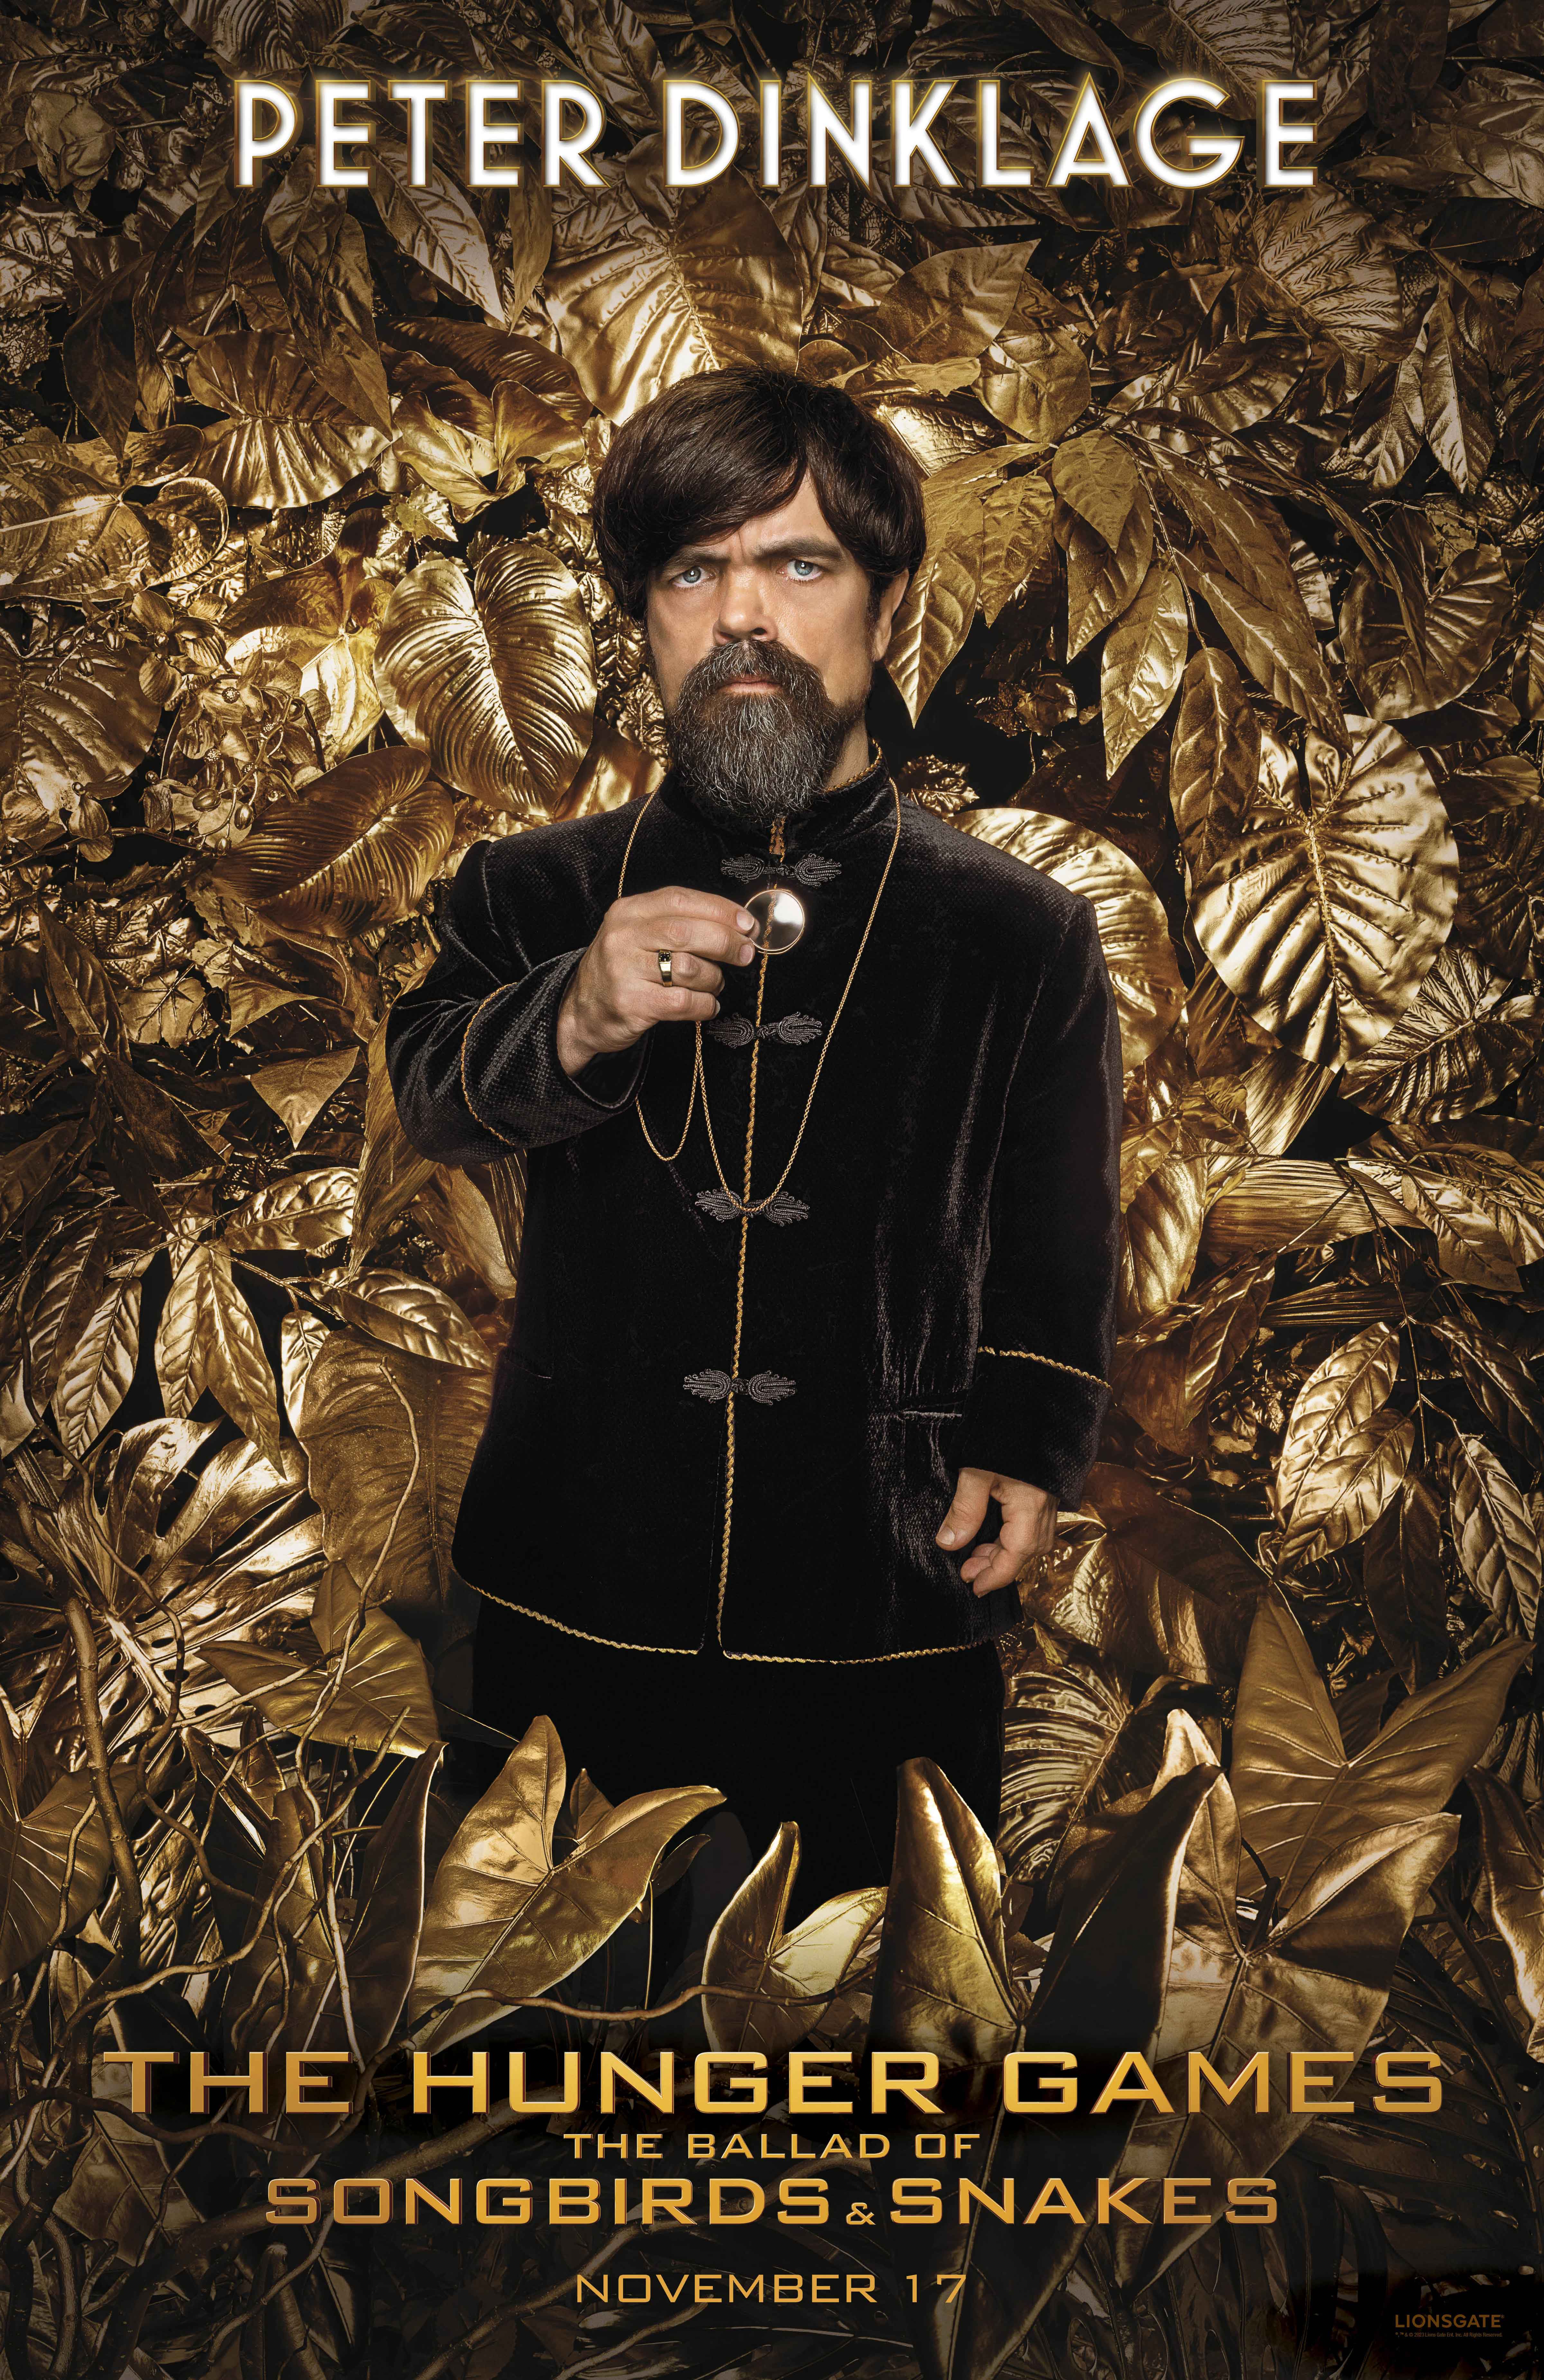 Peter Dinklage in a promotional phone wallpaper for The Hunger Games: The Ballad of Songbirds & Snakes surrounded by golden leaves.